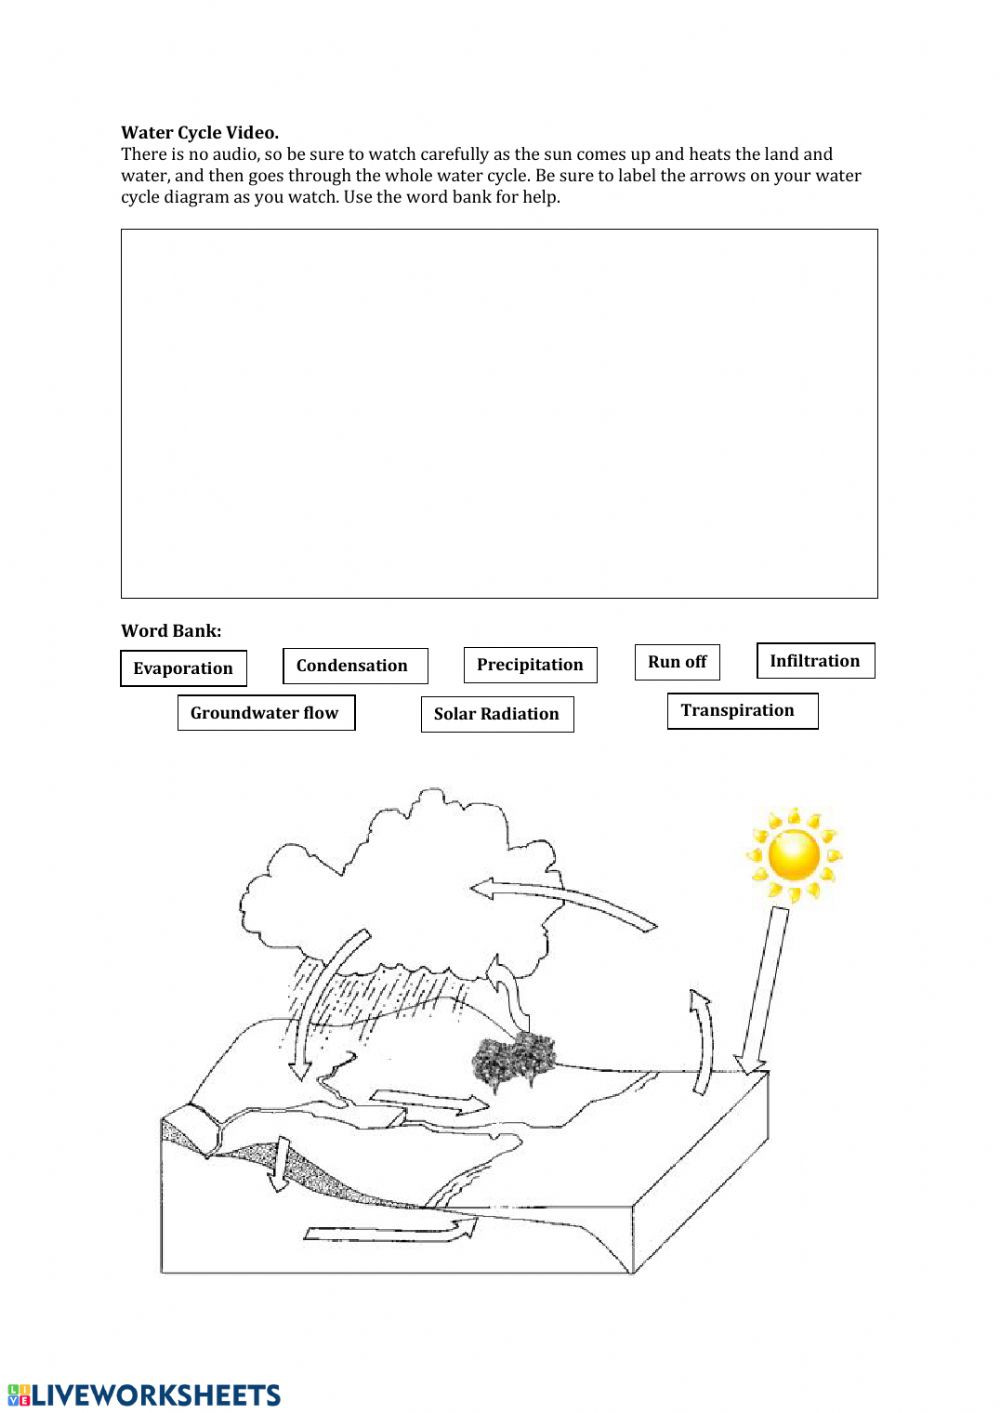 The Water Cycle Worksheet Answers the Water Cycle Interactive Worksheet